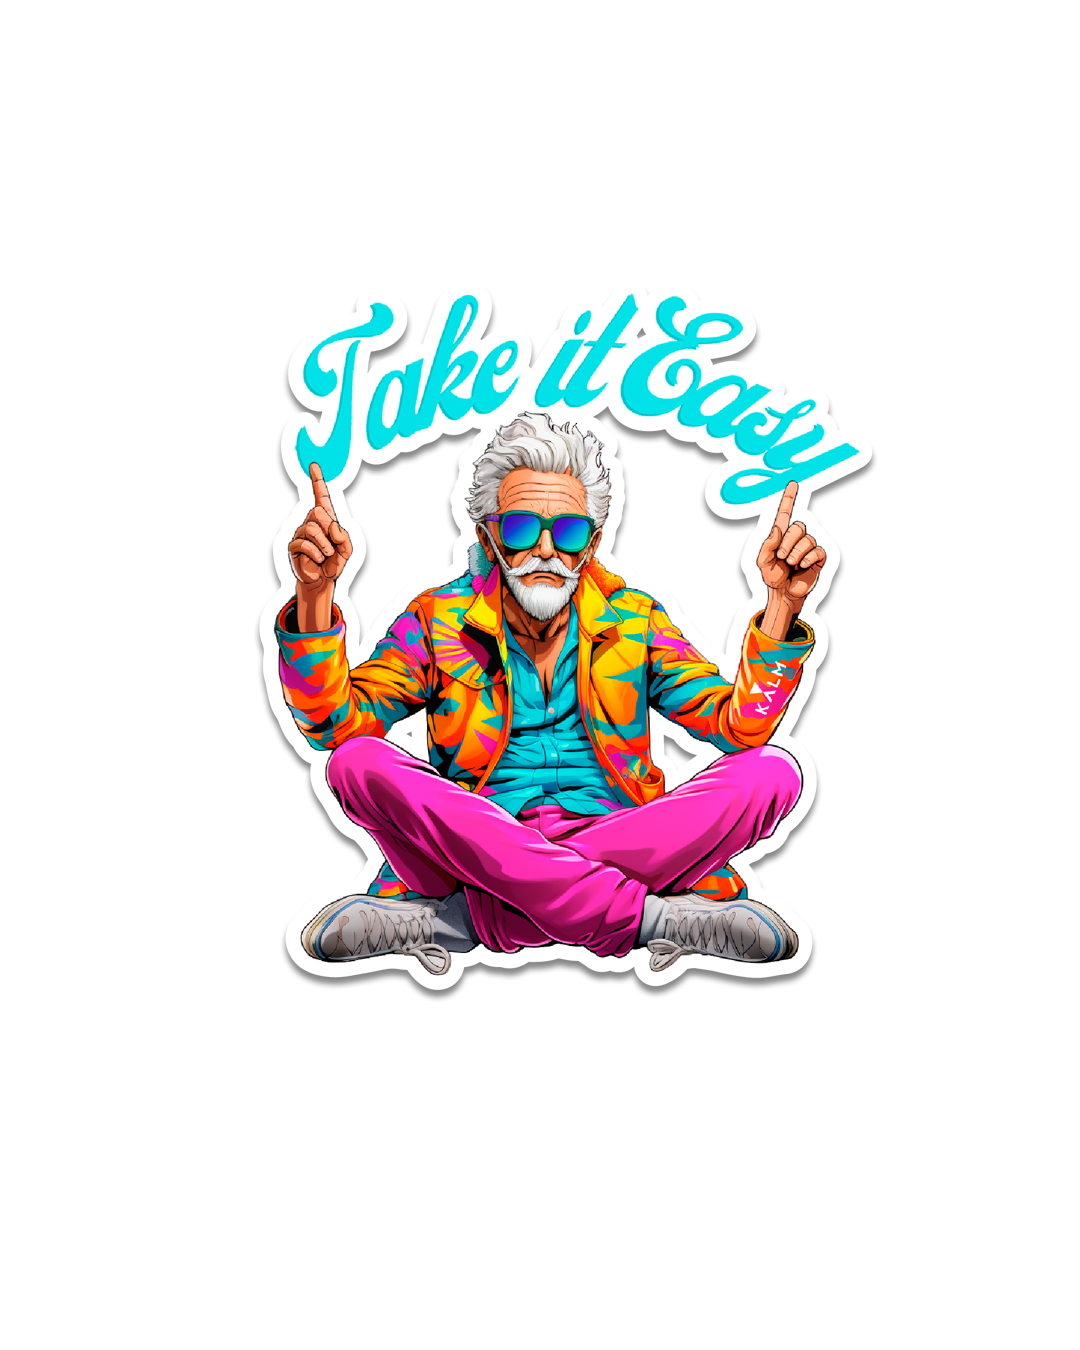 Kalm ''TAKE IT EASY'' Yogi Man Sticker. Personalize Anything with Our Stickers, Durable and Water-Resistant